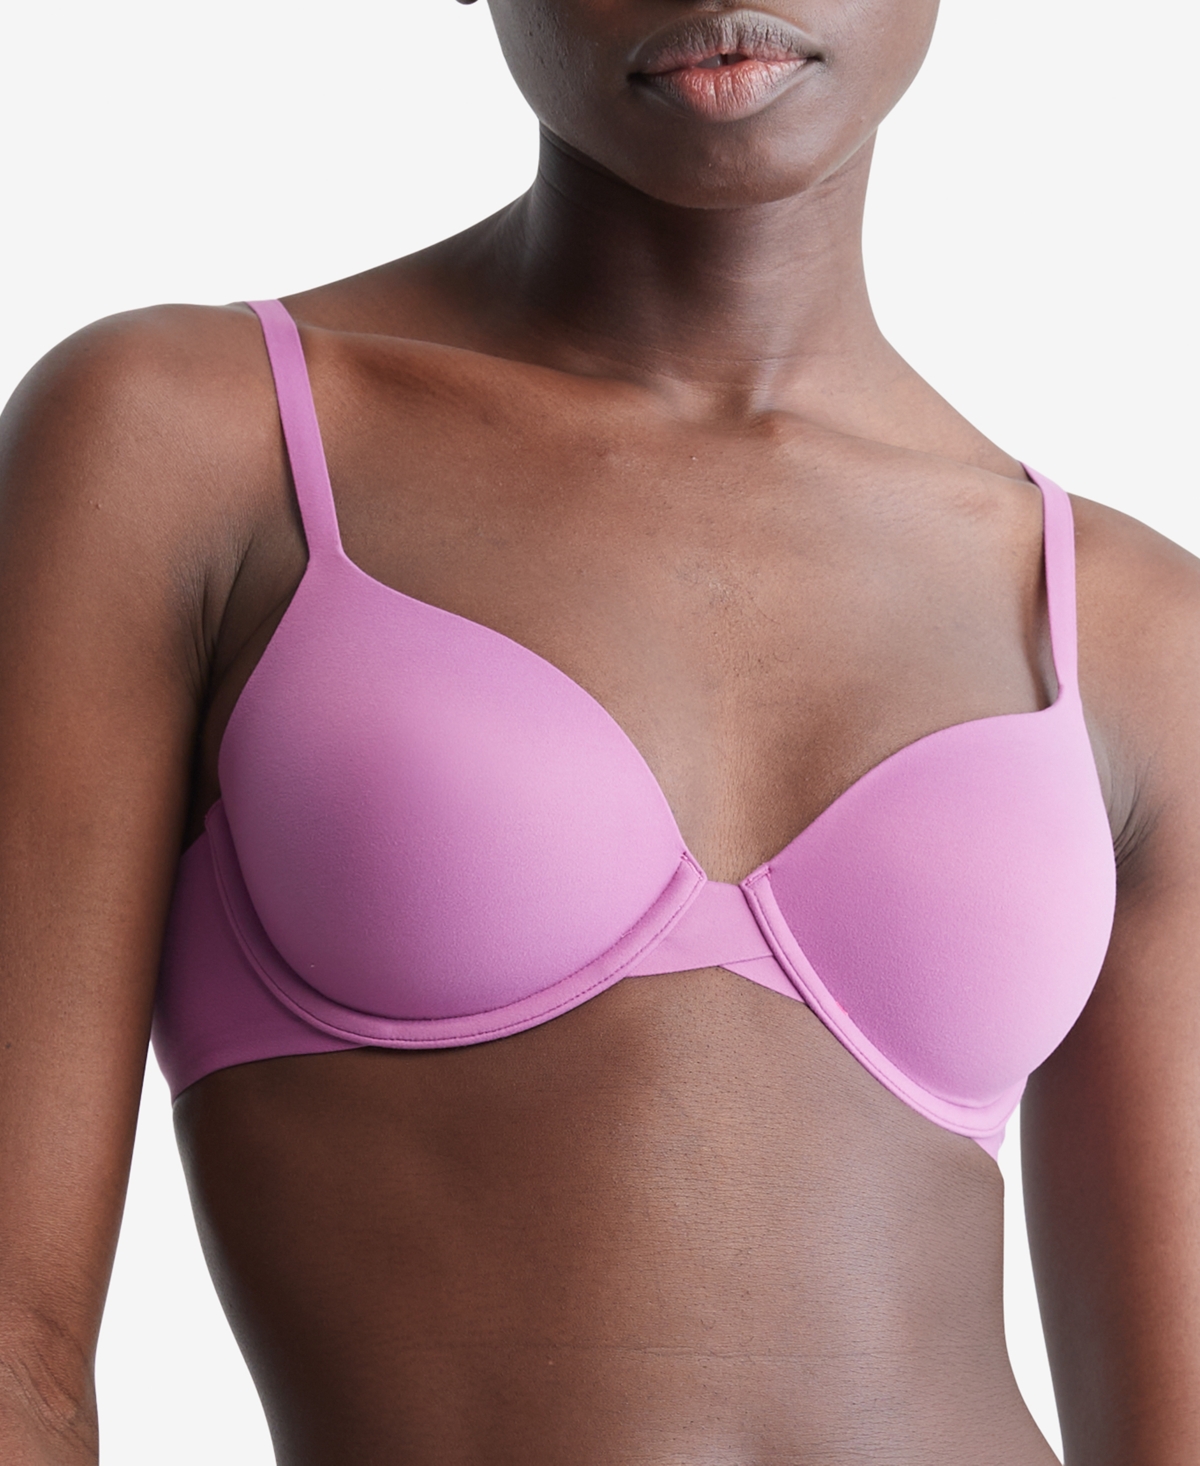 Calvin Klein Perfectly Fit Full Coverage T-Shirt Bra